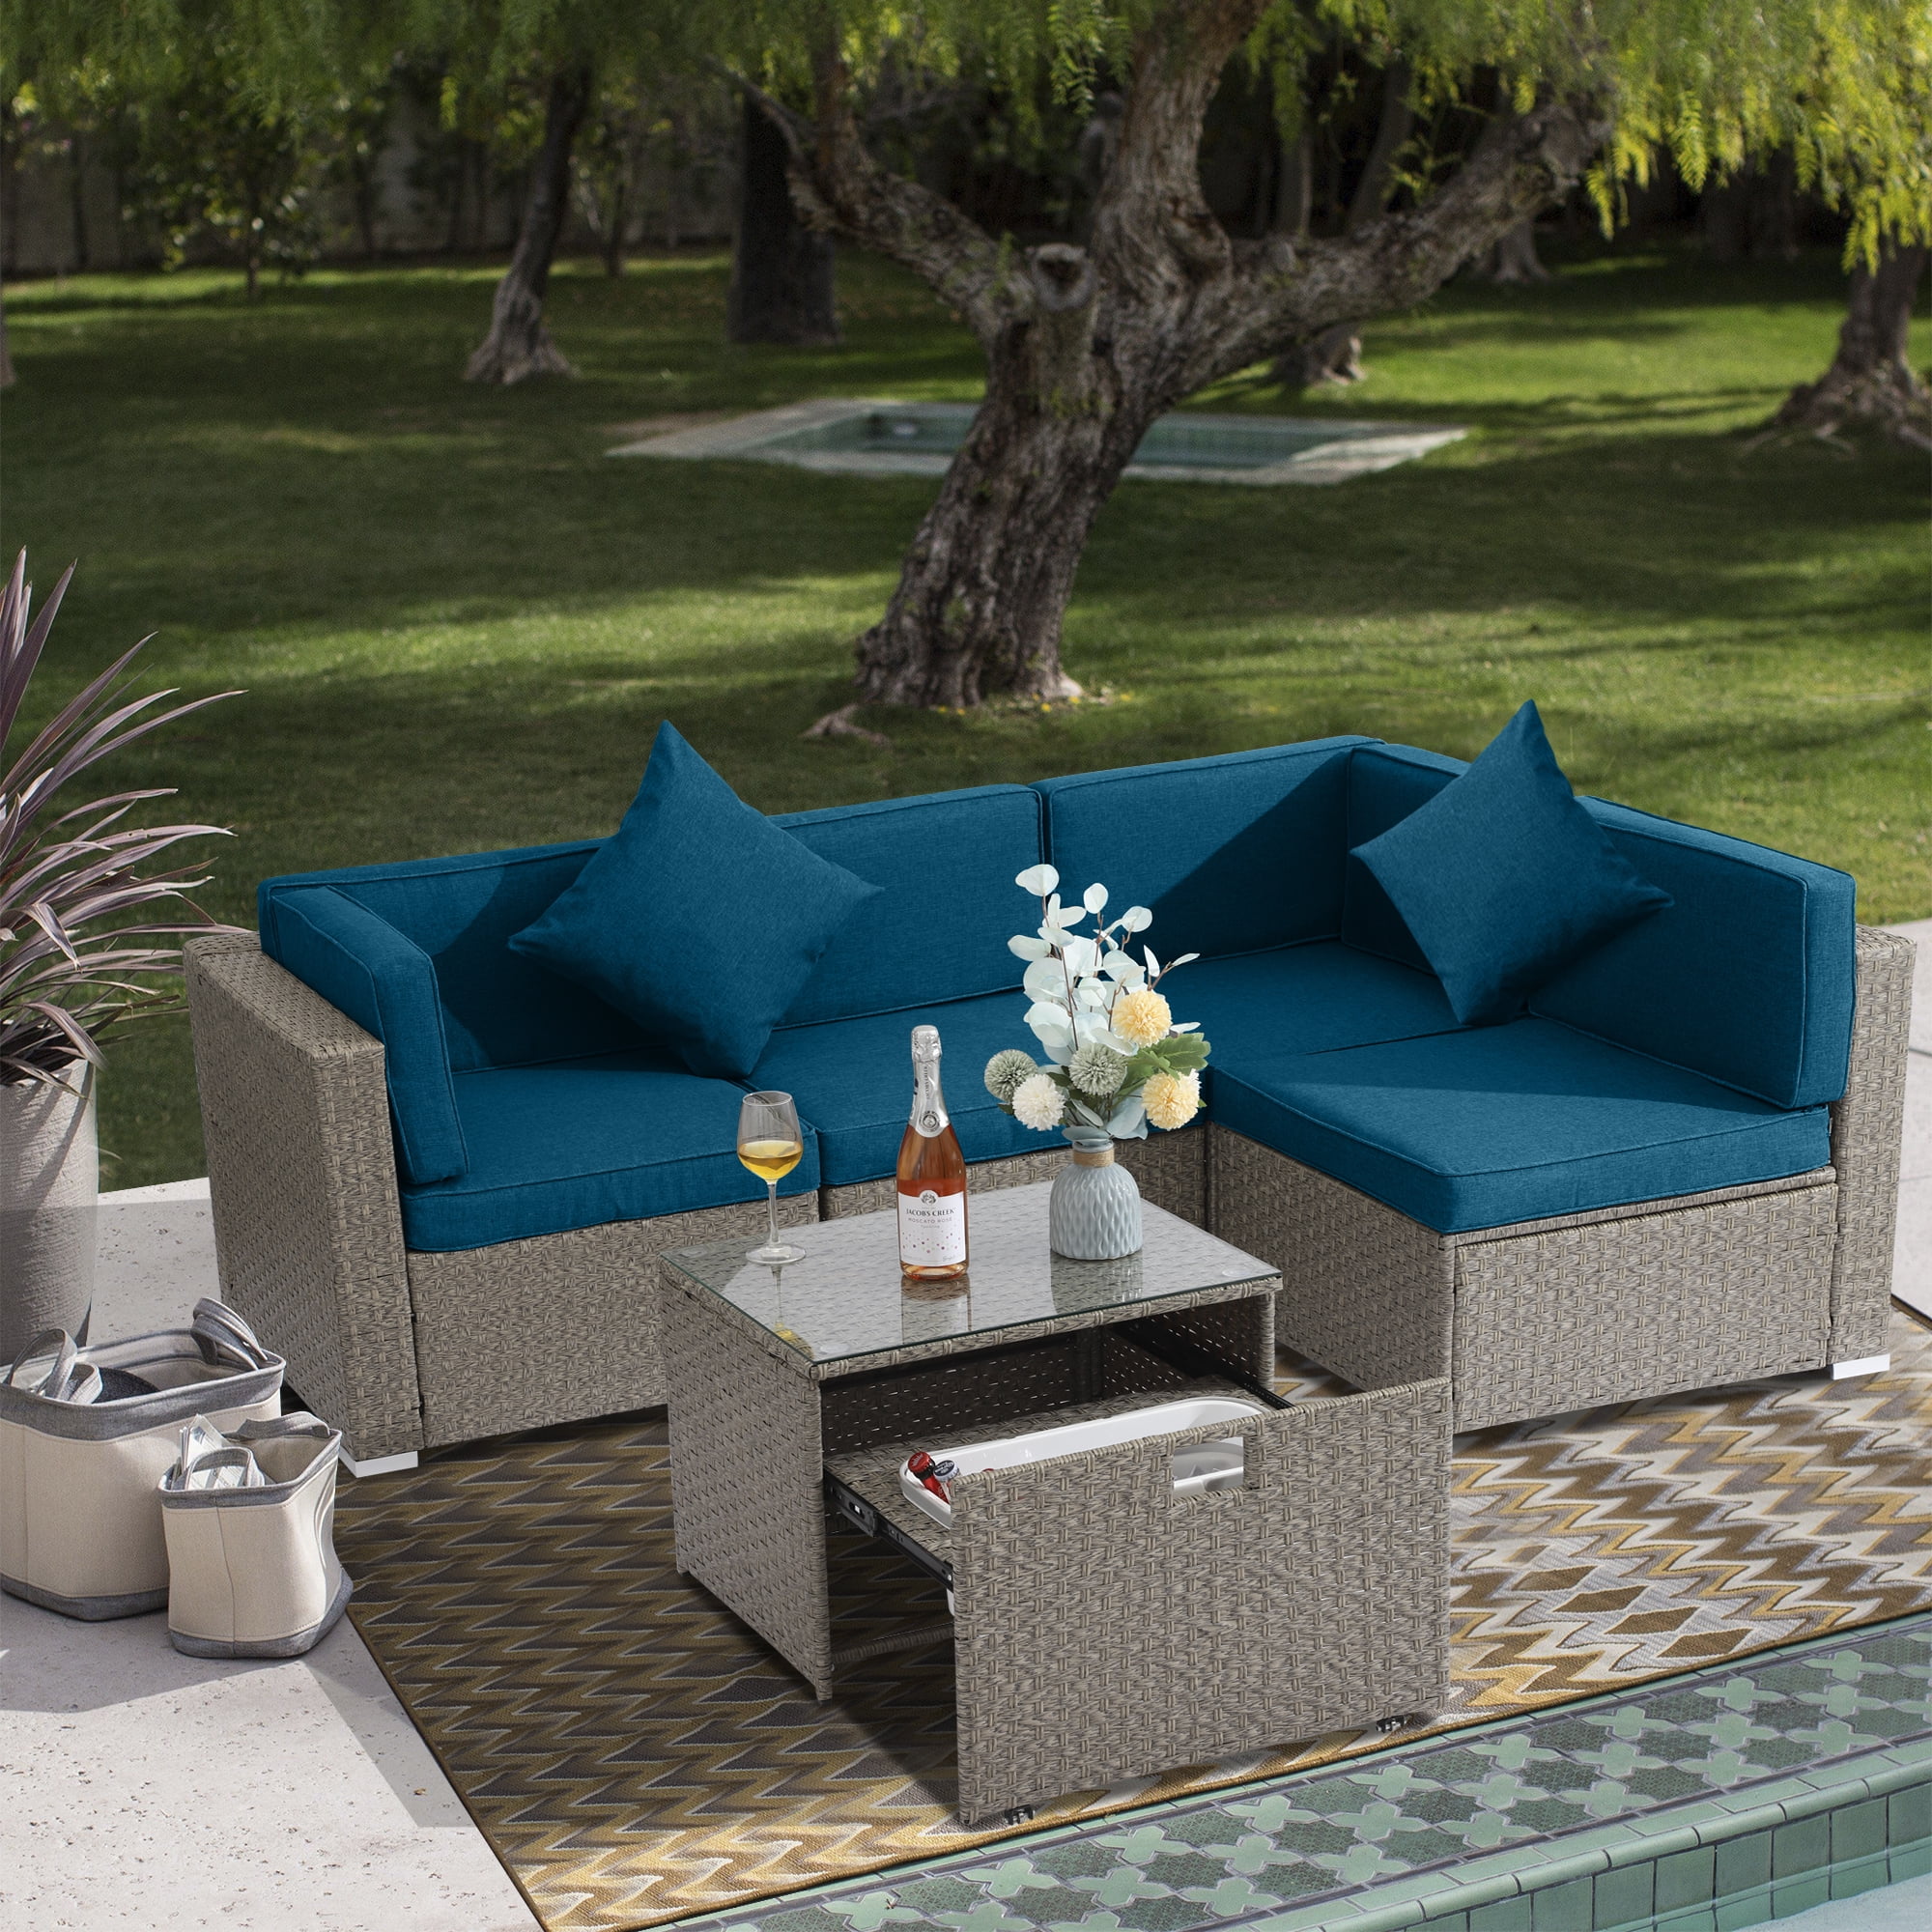 SOLAURA Outdoor 4-Piece Furniture Sectional Sofa Set All Weather Warm Grey Wicker with Nautical Navy Blue Cushions & Sophisticated Glass Coffee Table Conversation Set 